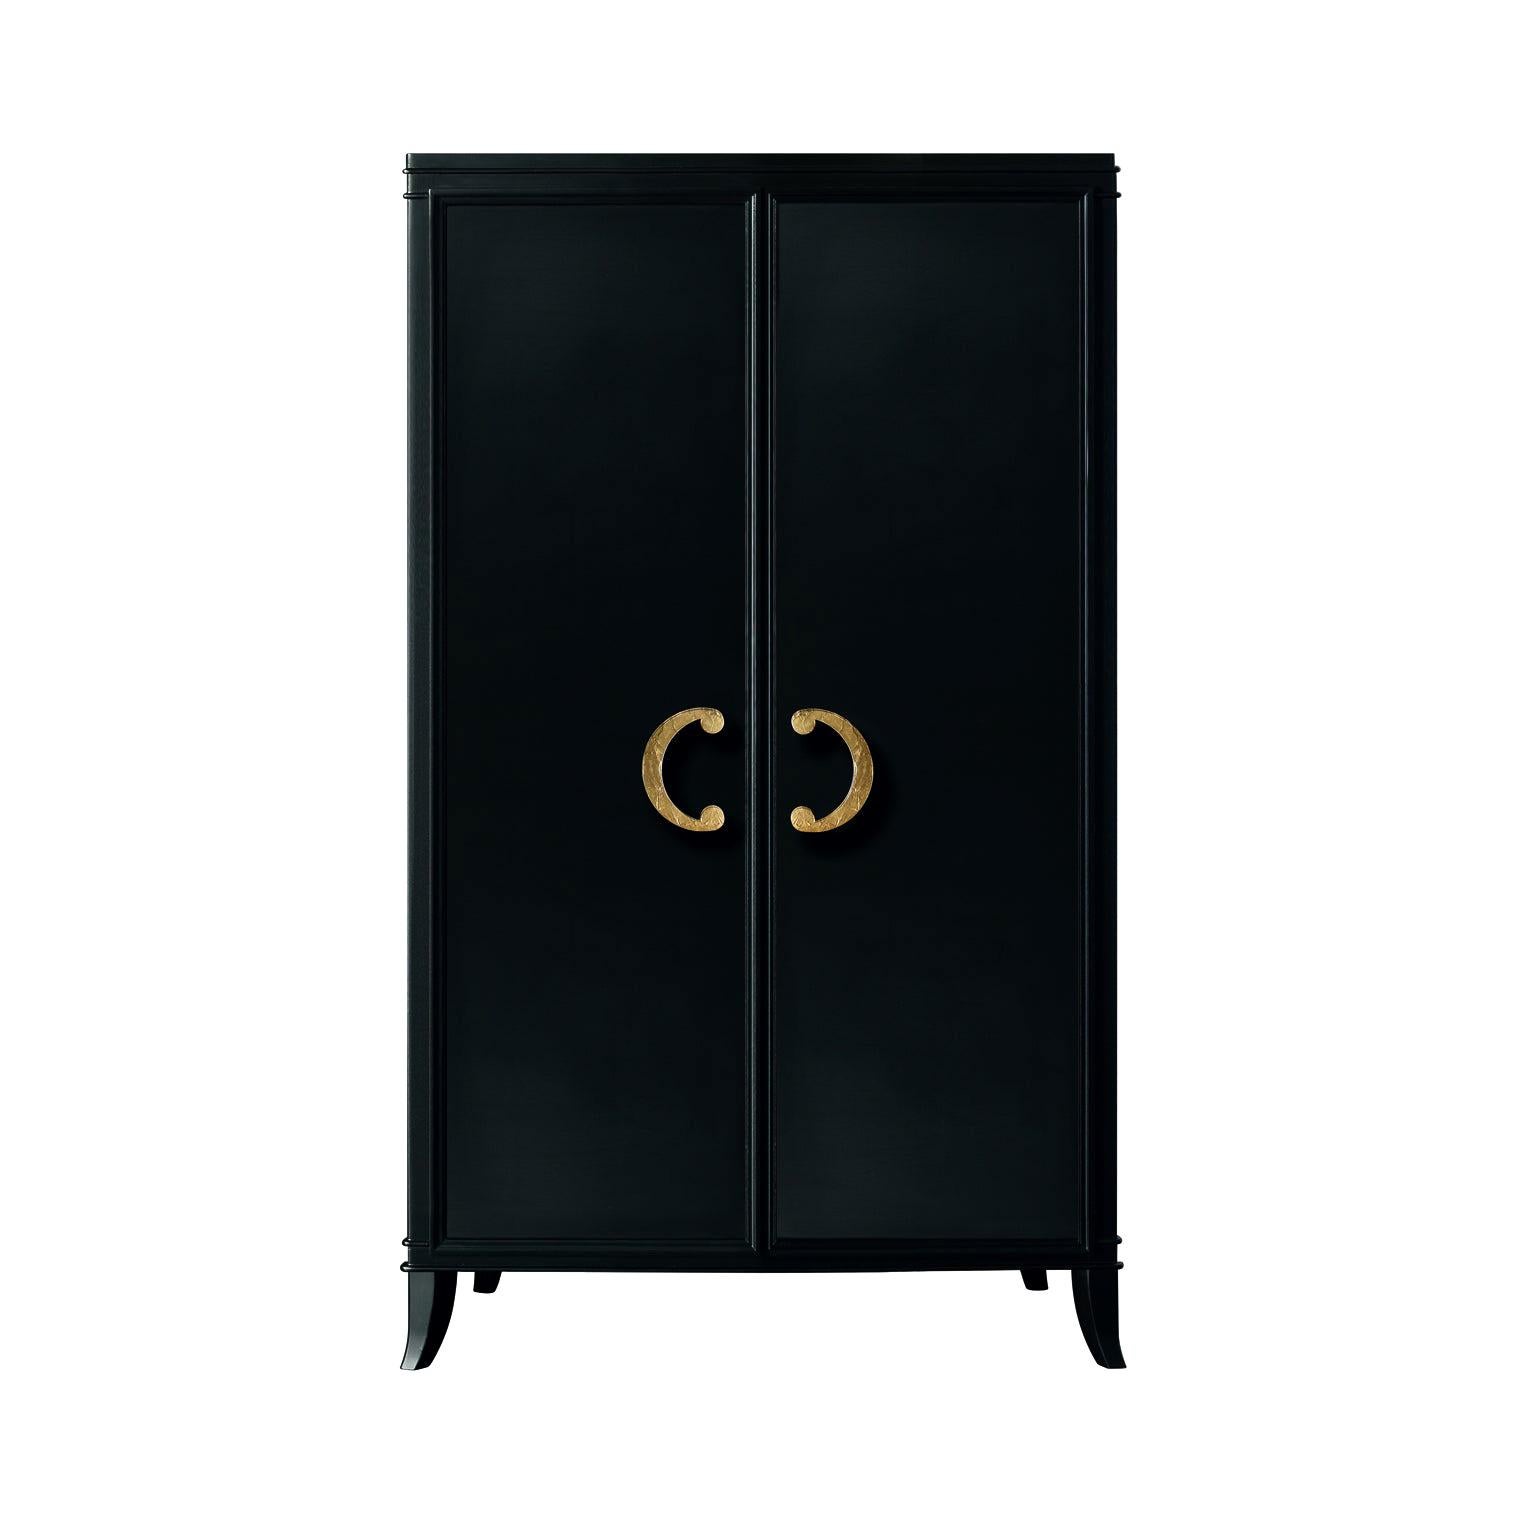 Isabella Costantini, Italy, Olimpia Armoire D45 For Sale